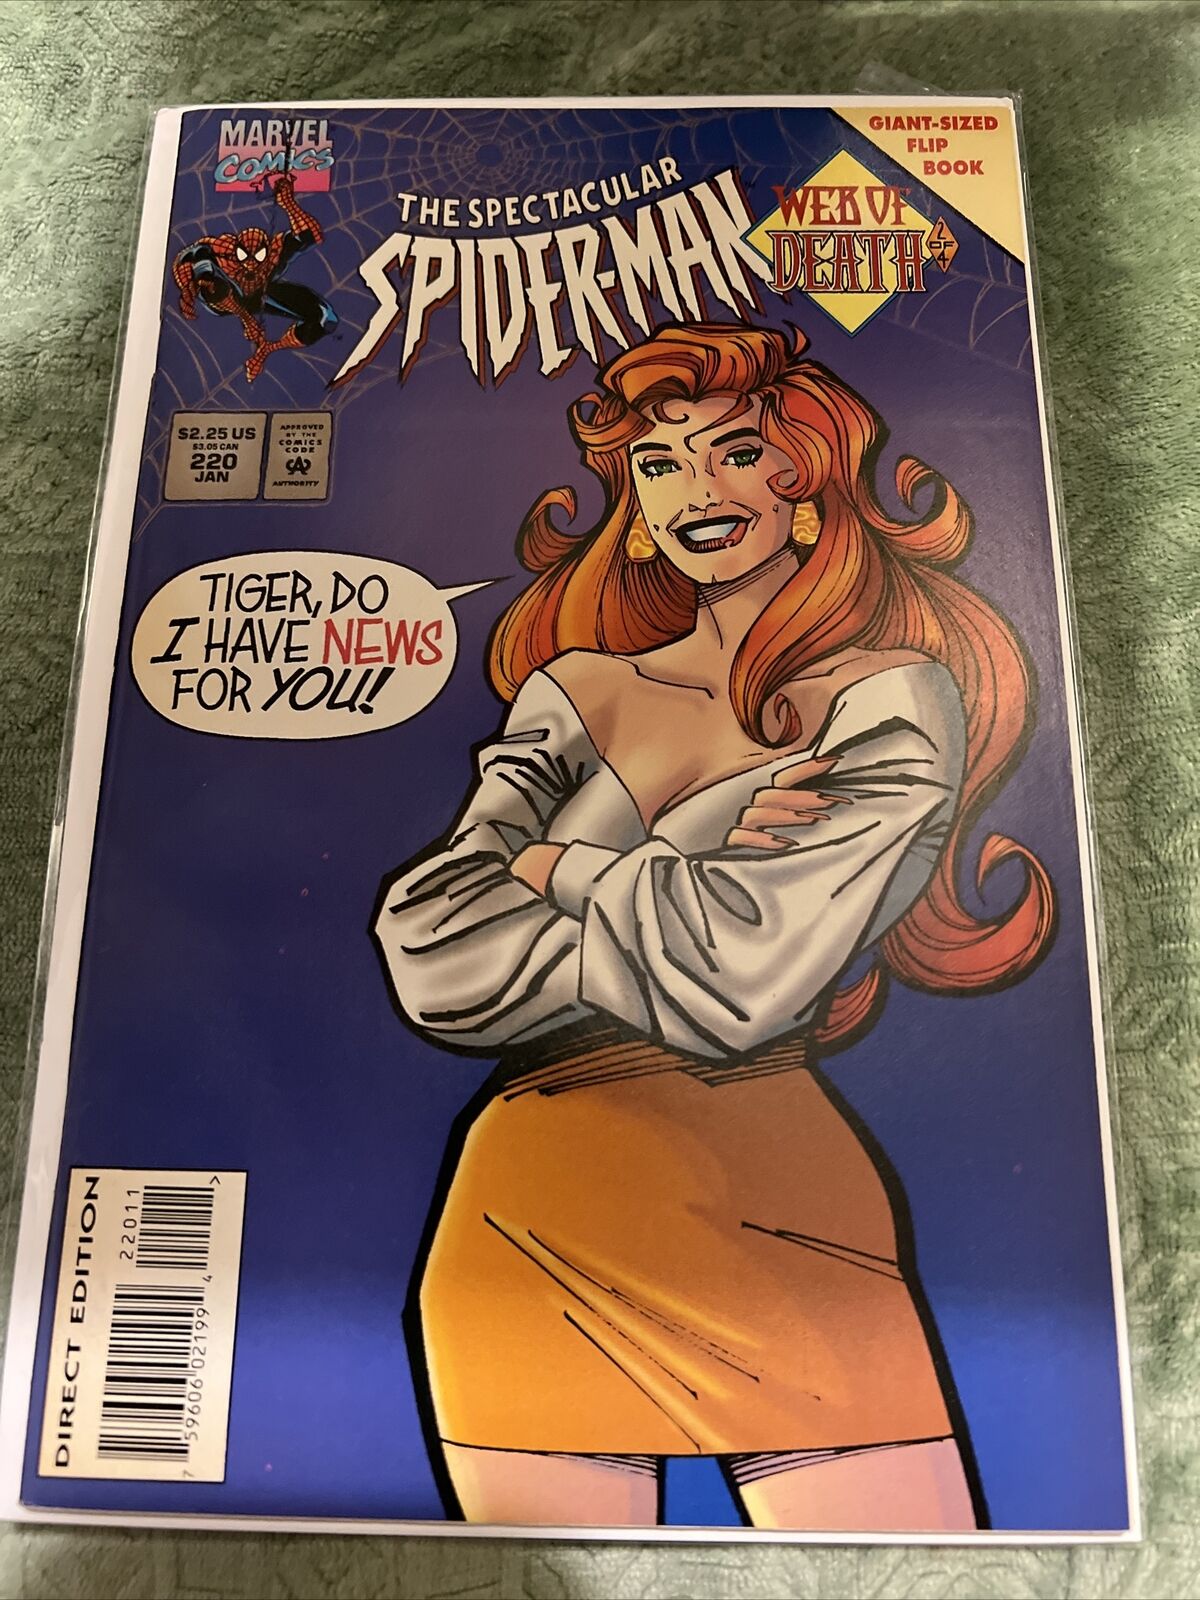 The Spectacular Spider-man #220 (Jan, 1995) double-sided book